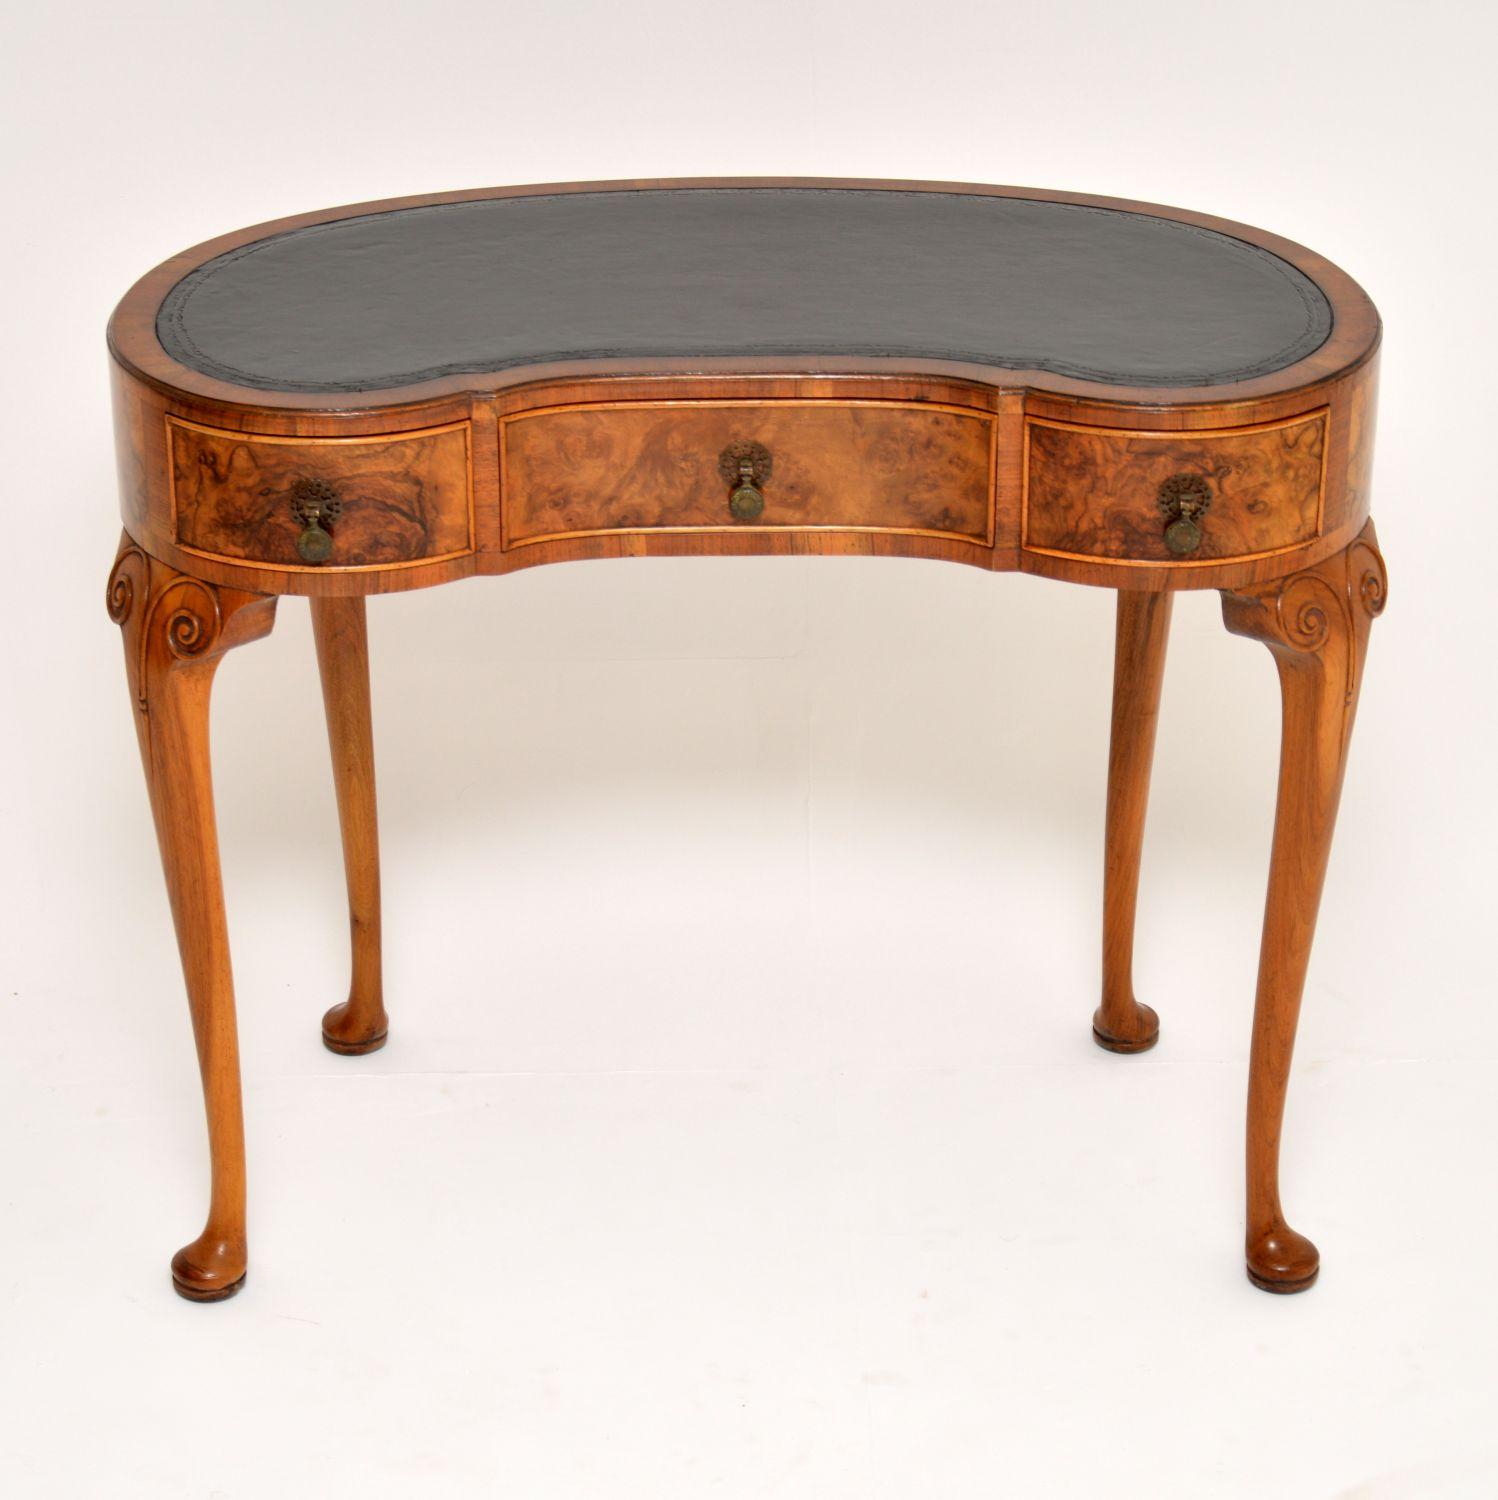 Antique kidney shaped burr walnut writing table with a tooled leather top and in excellent condition. This desk is Queen Anne style and of highest quality and dating to the 1920s period. It has three drawers with burr walnut fronts, fine dovetails